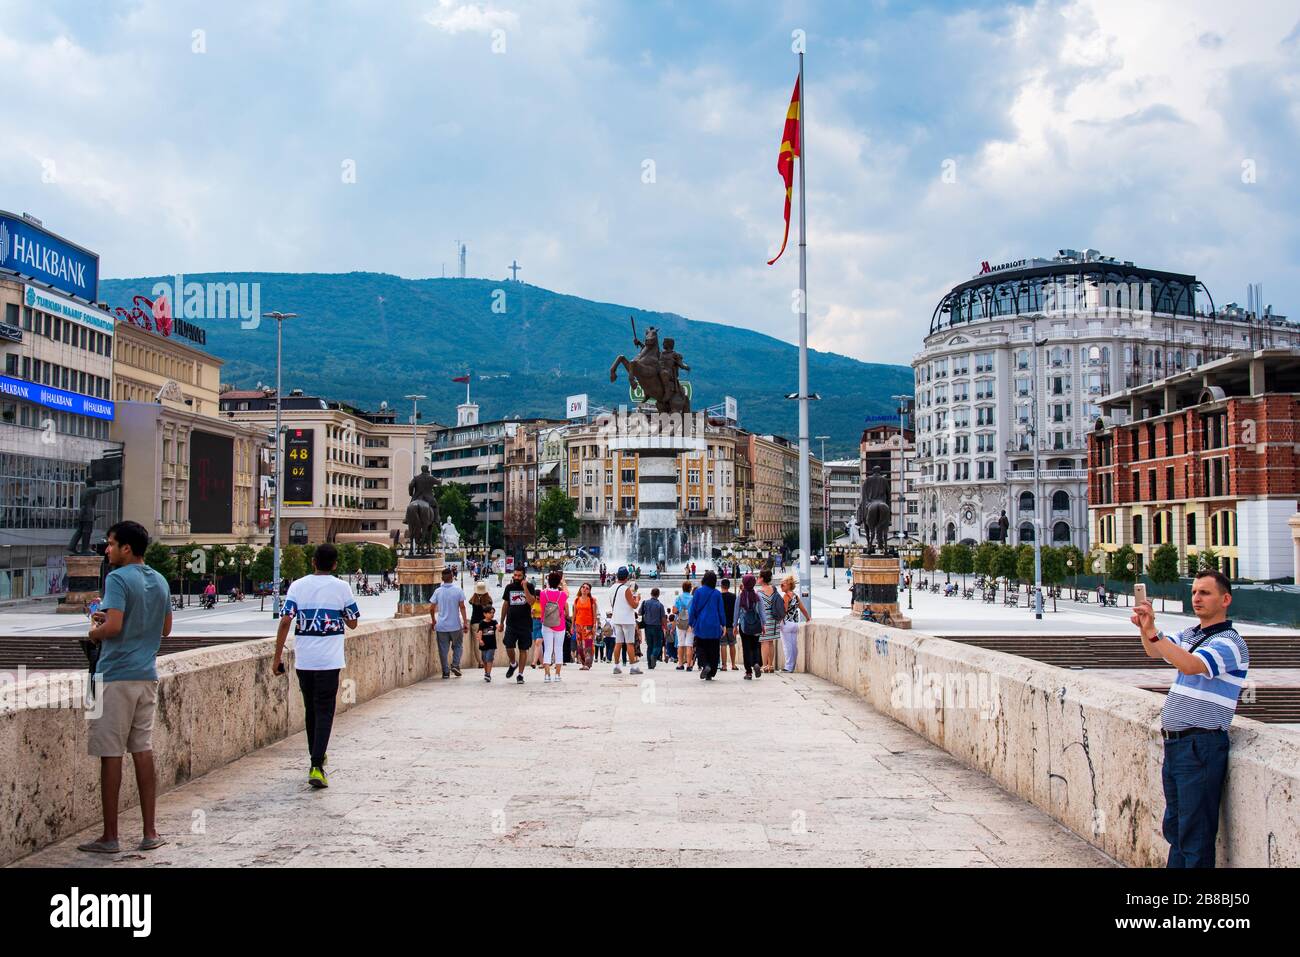 Skopje, North Macedonia - August 26, 2018: Main square in Skopje, capital city of Macedonia with Alexander the great monument on a cloudy day Stock Photo